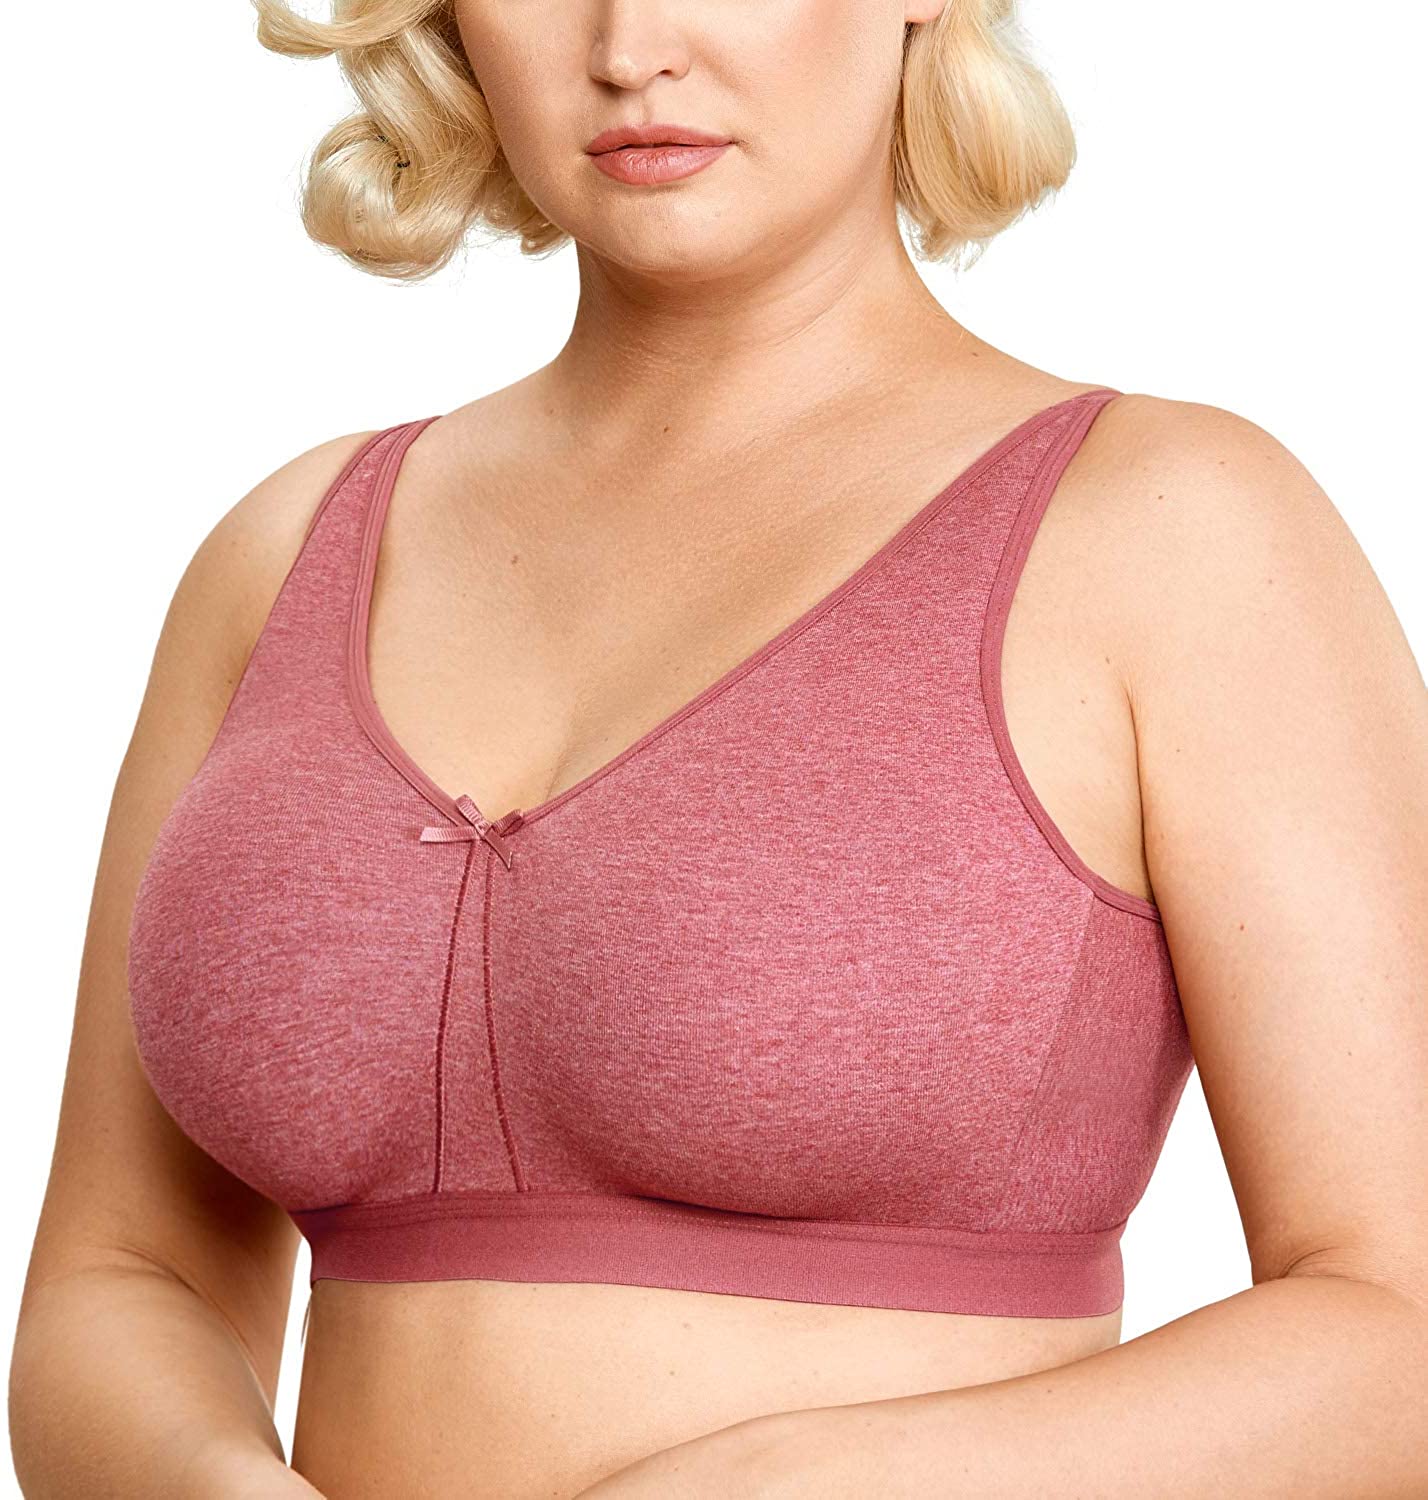  AISILIN Womens Wireless Plus Size Bra Cotton Support Comfort  Unlined Sleep Smoke Fills The Air